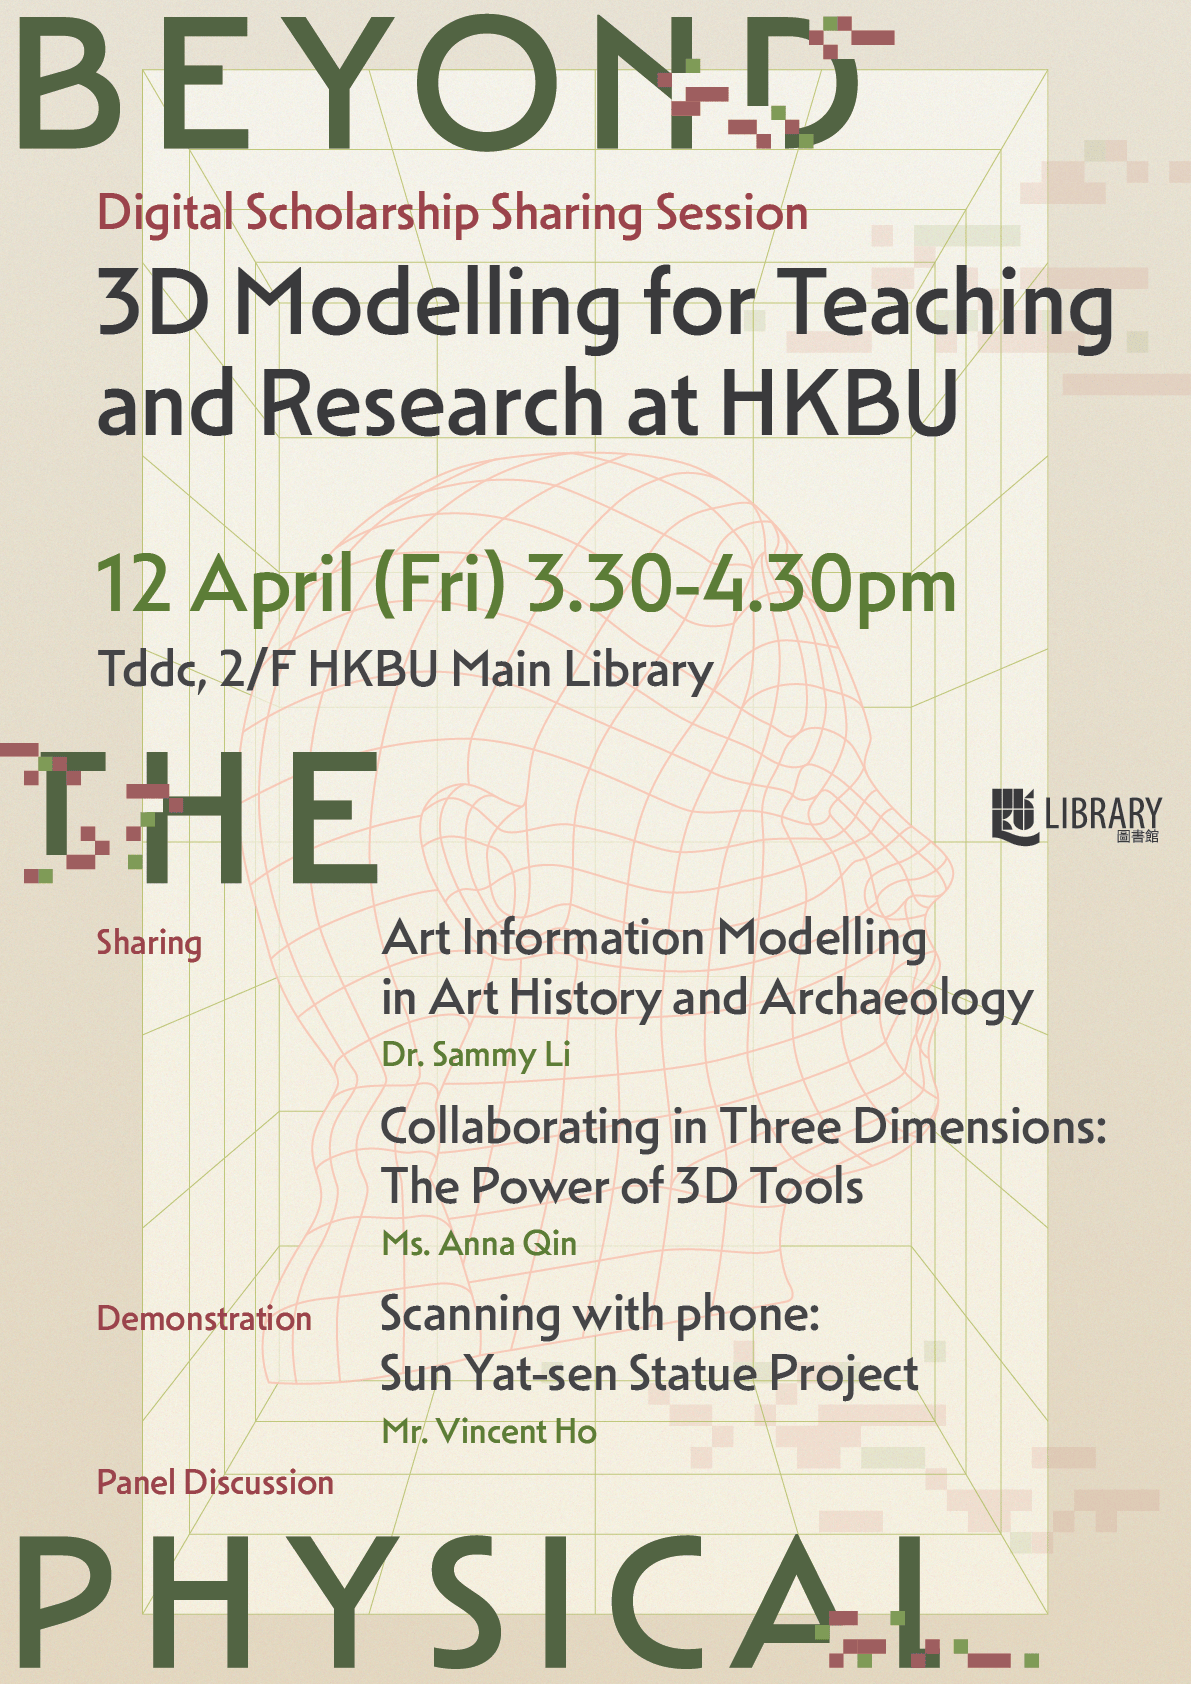 Digital Scholarship Sharing Session: 3D Modelling for Teaching and Research at HKBU